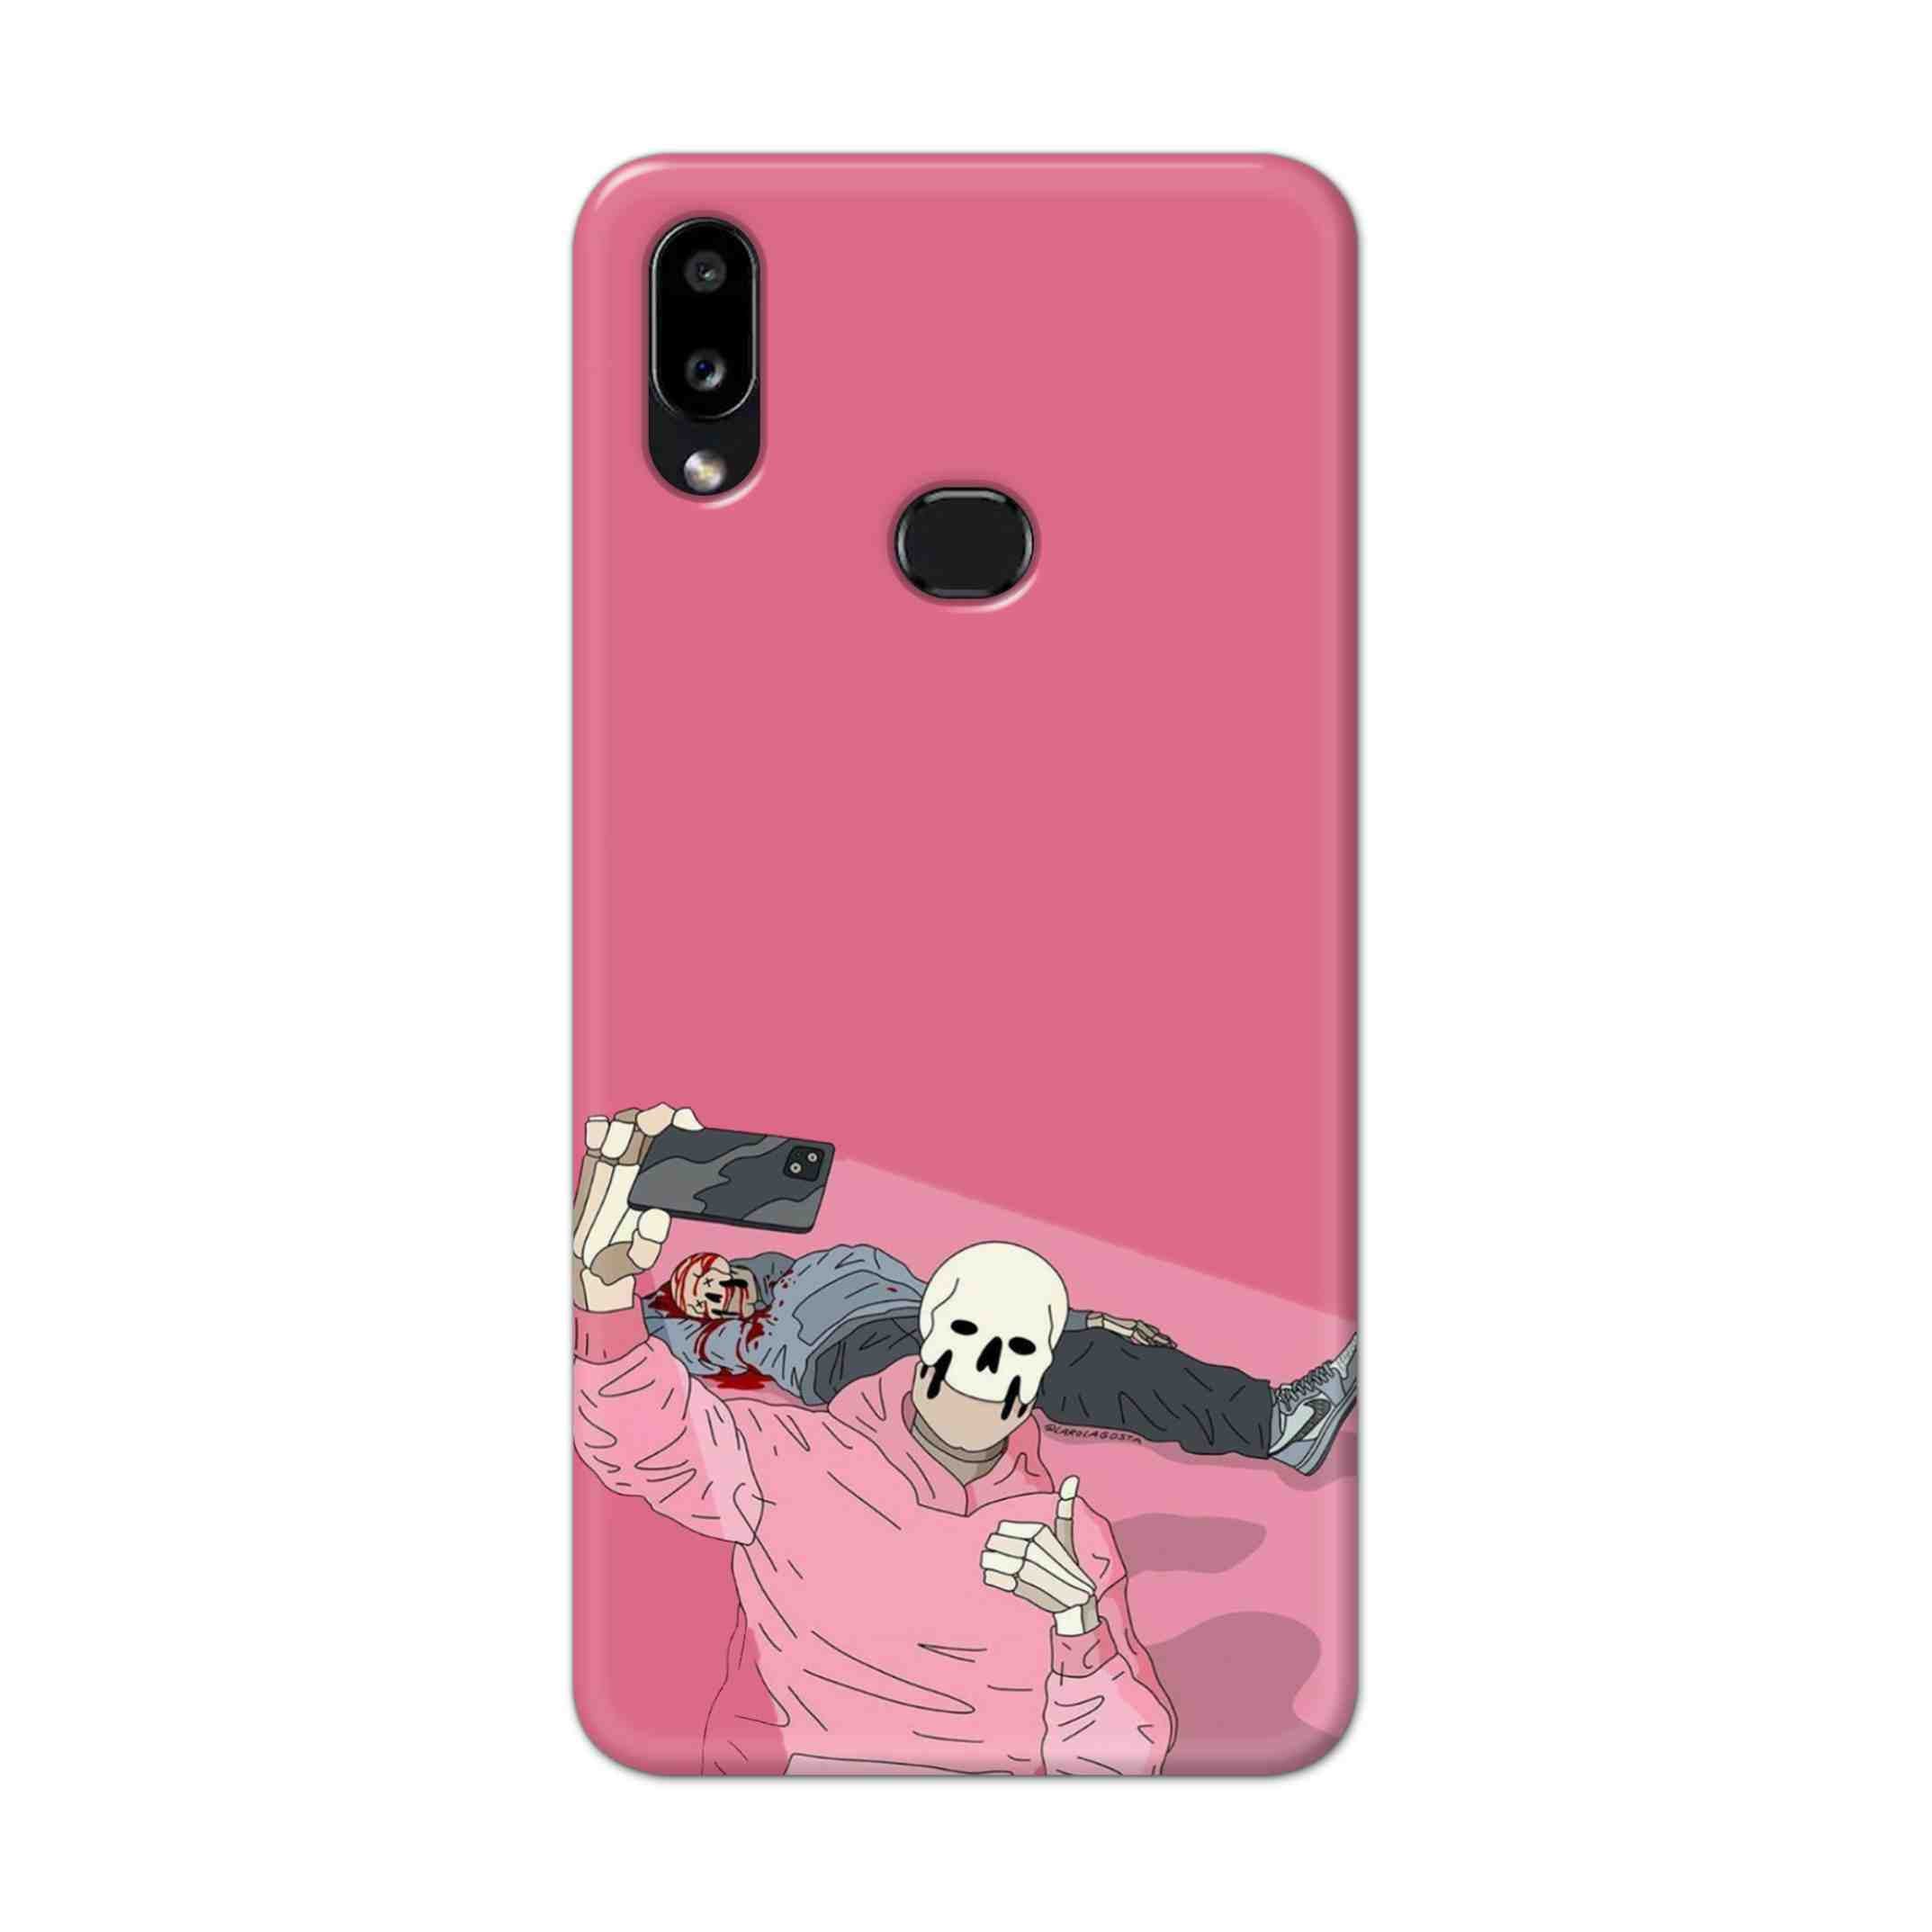 Buy Selfie Hard Back Mobile Phone Case Cover For Samsung Galaxy M01s Online